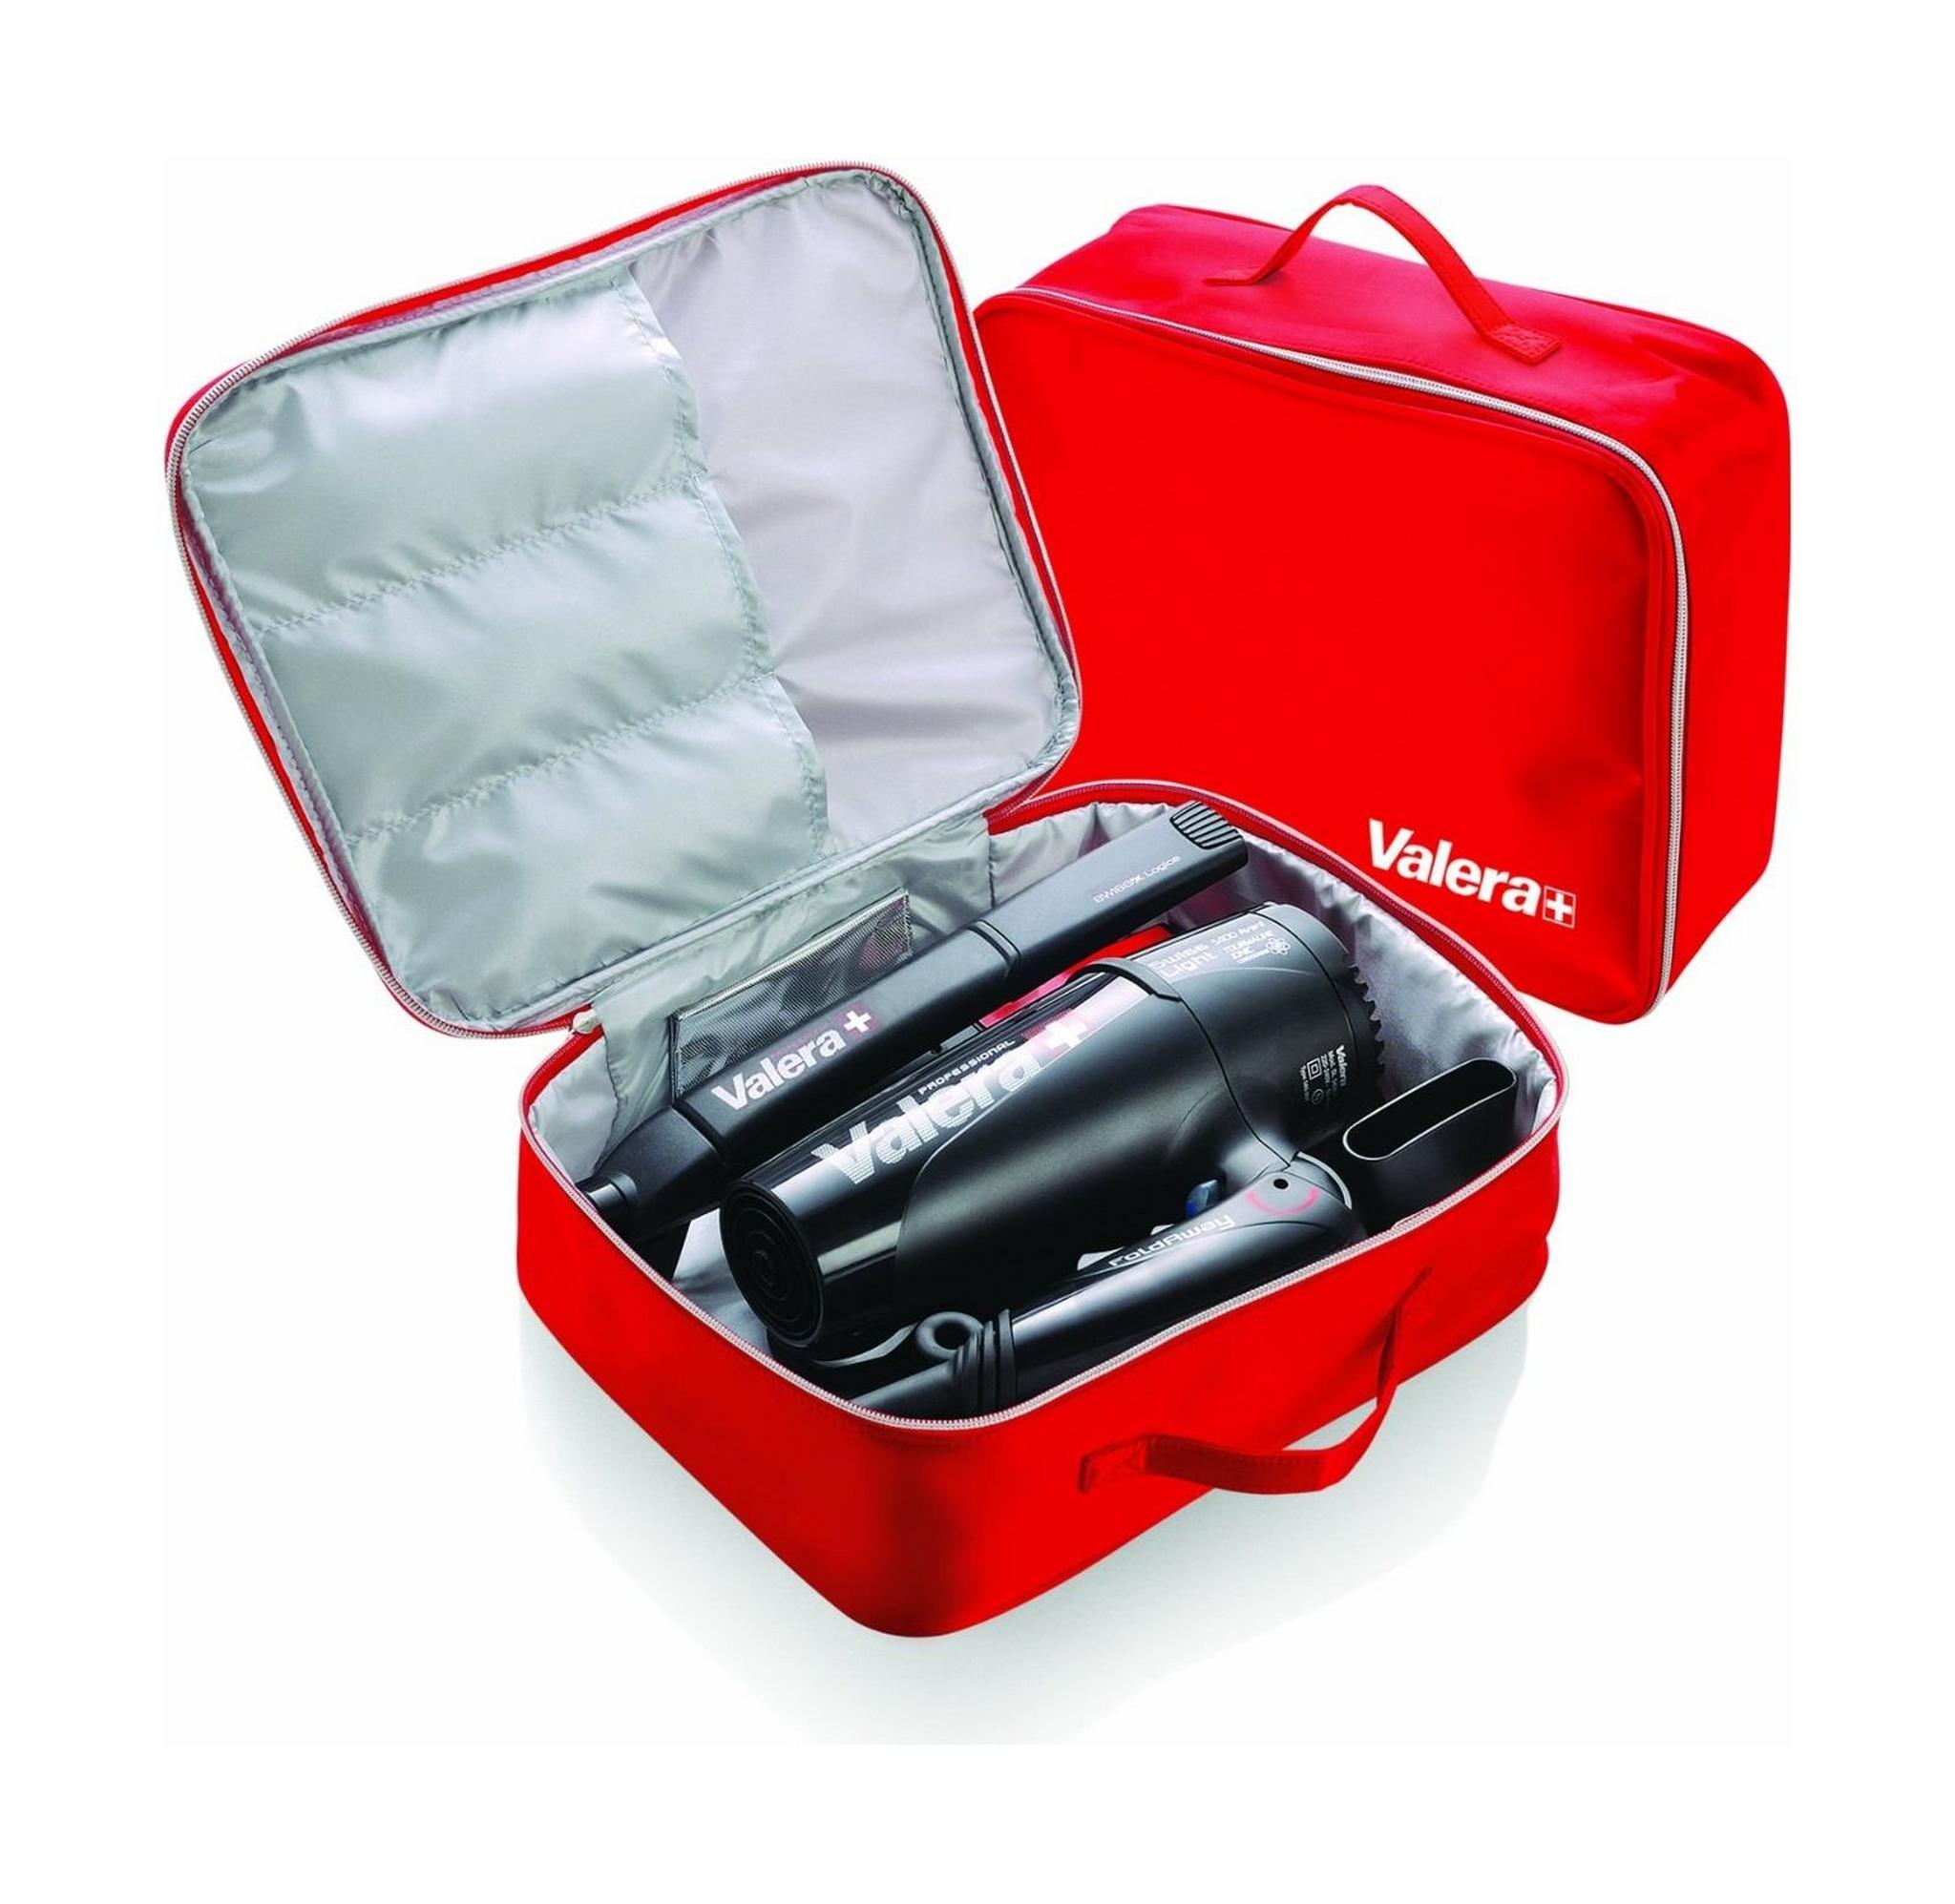 Valera Swiss Professional Travel Ions Hair Dryer and Straightener Styling Set (560STS)